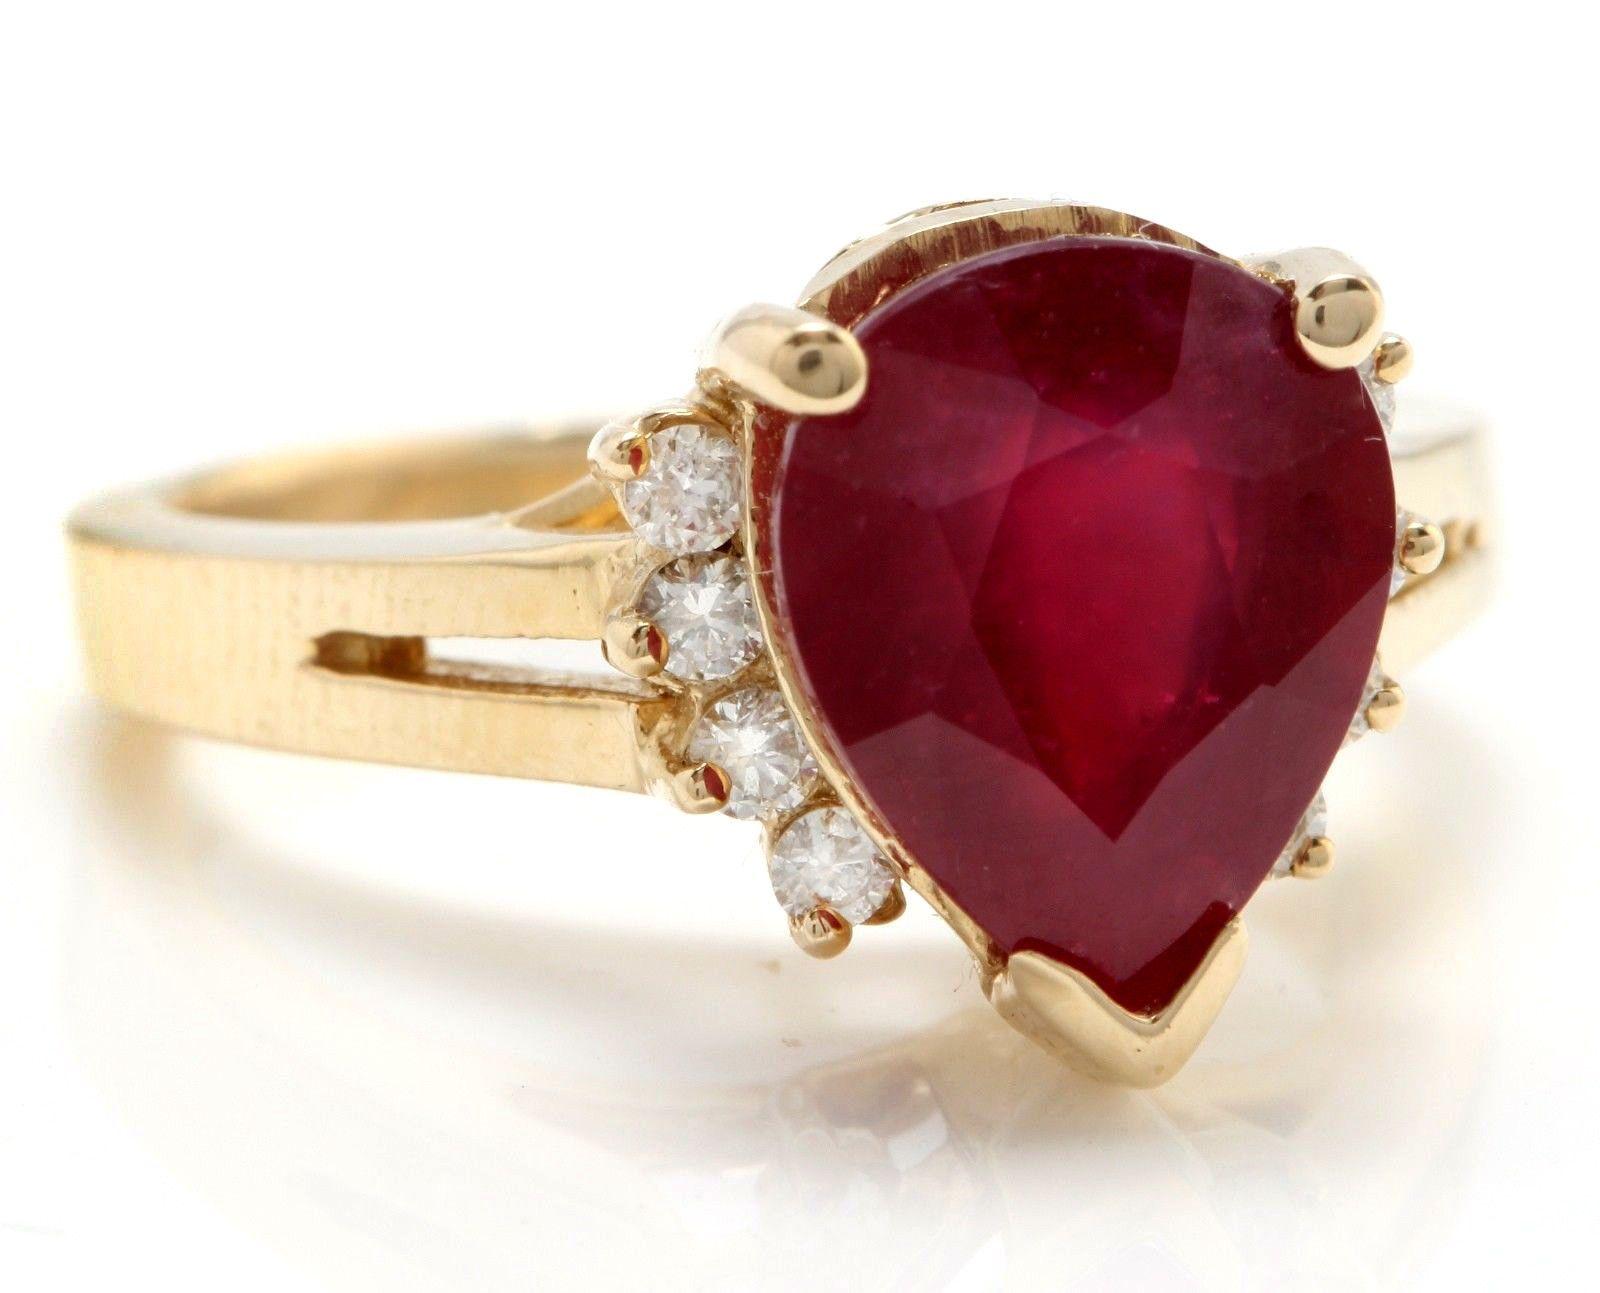 4.90 Carats Impressive Red Ruby and Diamond 14K Yellow Gold Ring

Total Red Ruby Weight is: 4.70 Carats (lead glass-filled)

Ruby Measures: 12.14 x 9.85mm

Natural Round Diamonds Weight: .20 Carats (color G-H / Clarity SI1-SI2)

Ring size: 7 (we